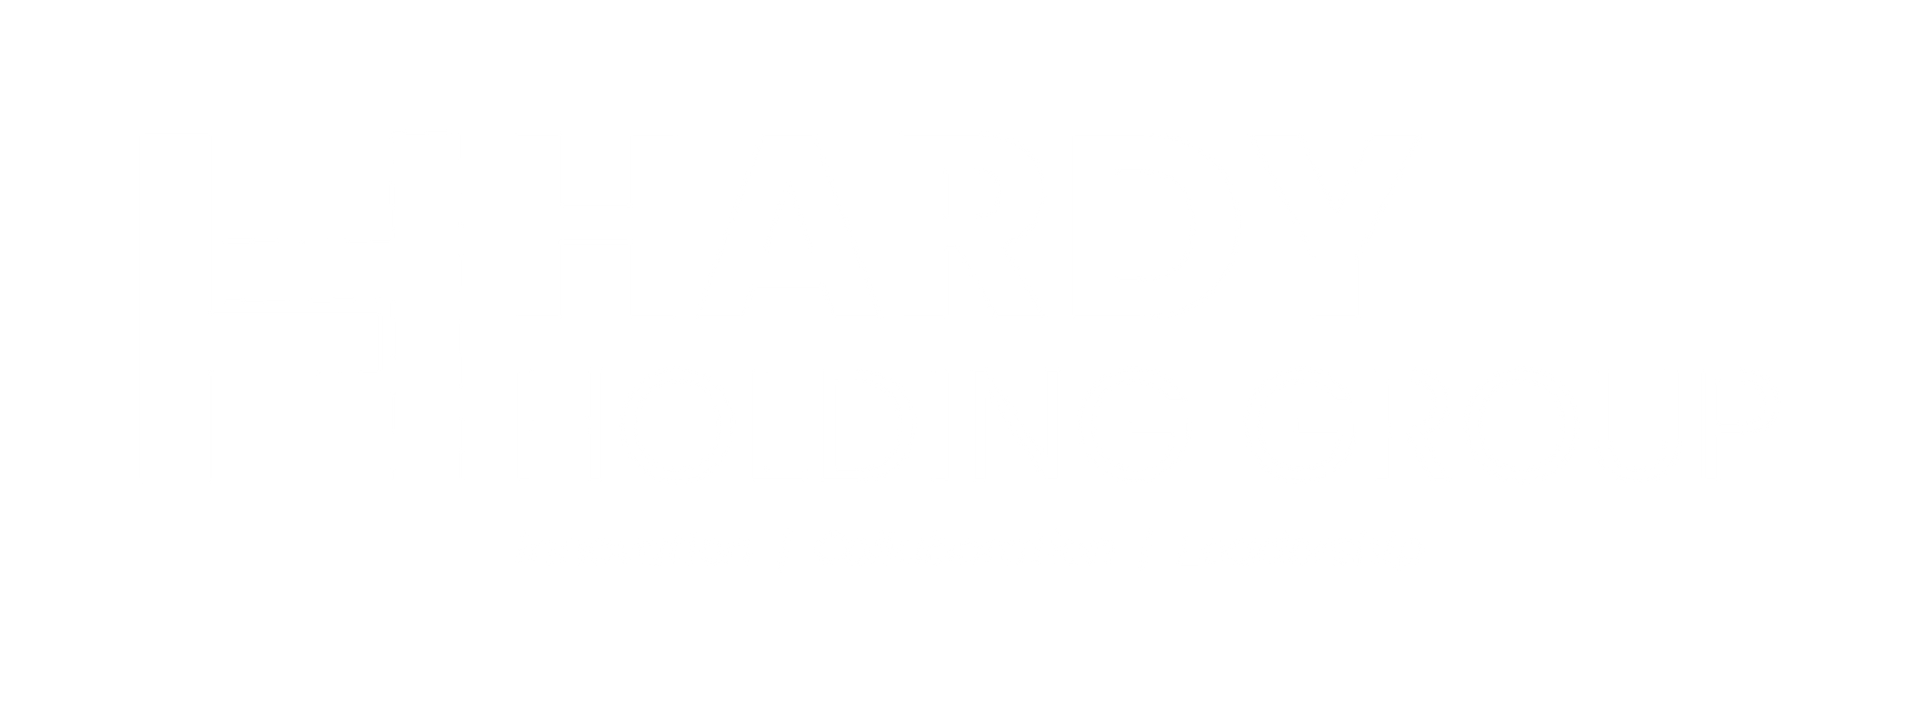 Hardy Holding Group Logo. We Are the Infrastructure Construction Leaders in the Midwest.